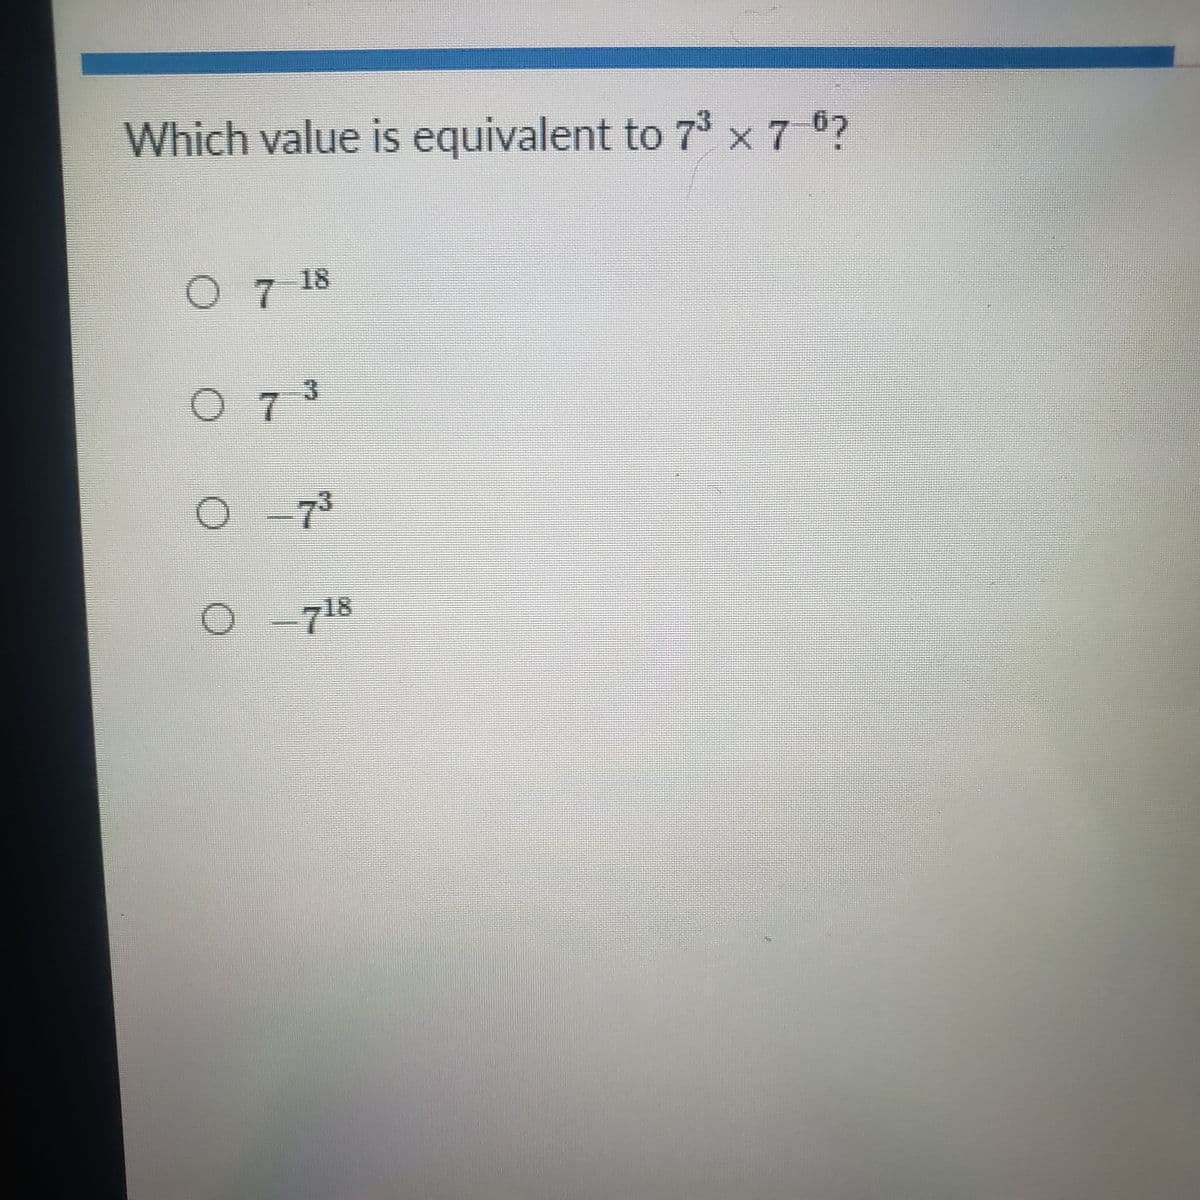 Which value is equivalent to 7 x 7 ?
O7 18
O 7 3
7°
0-7 8
